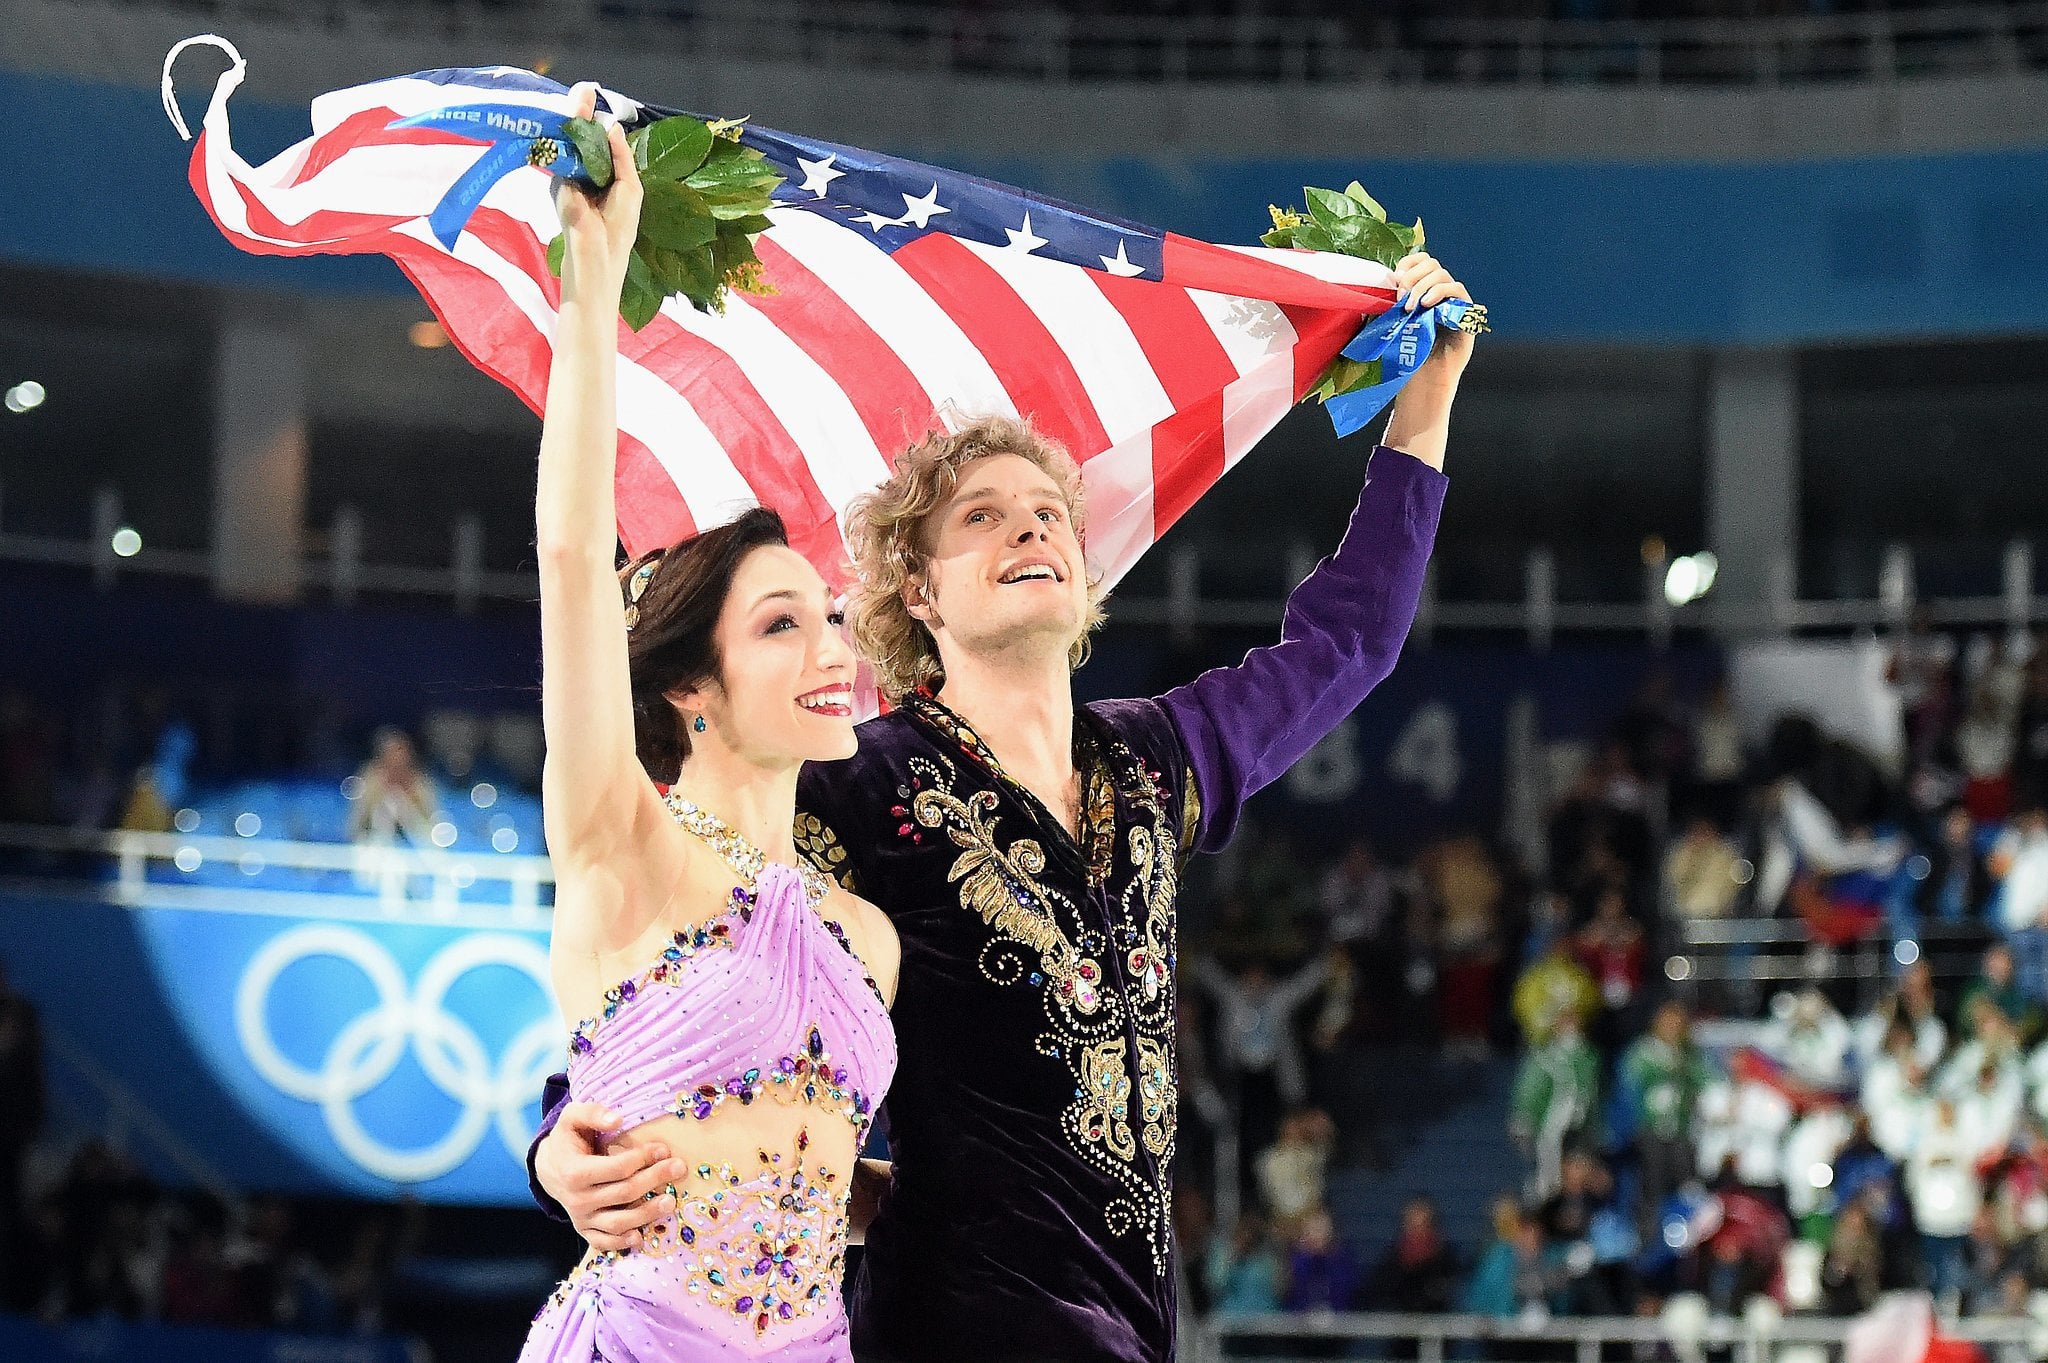 Olympic Ice Dancing Partners Meryl Davis And Charlie White Celebrated